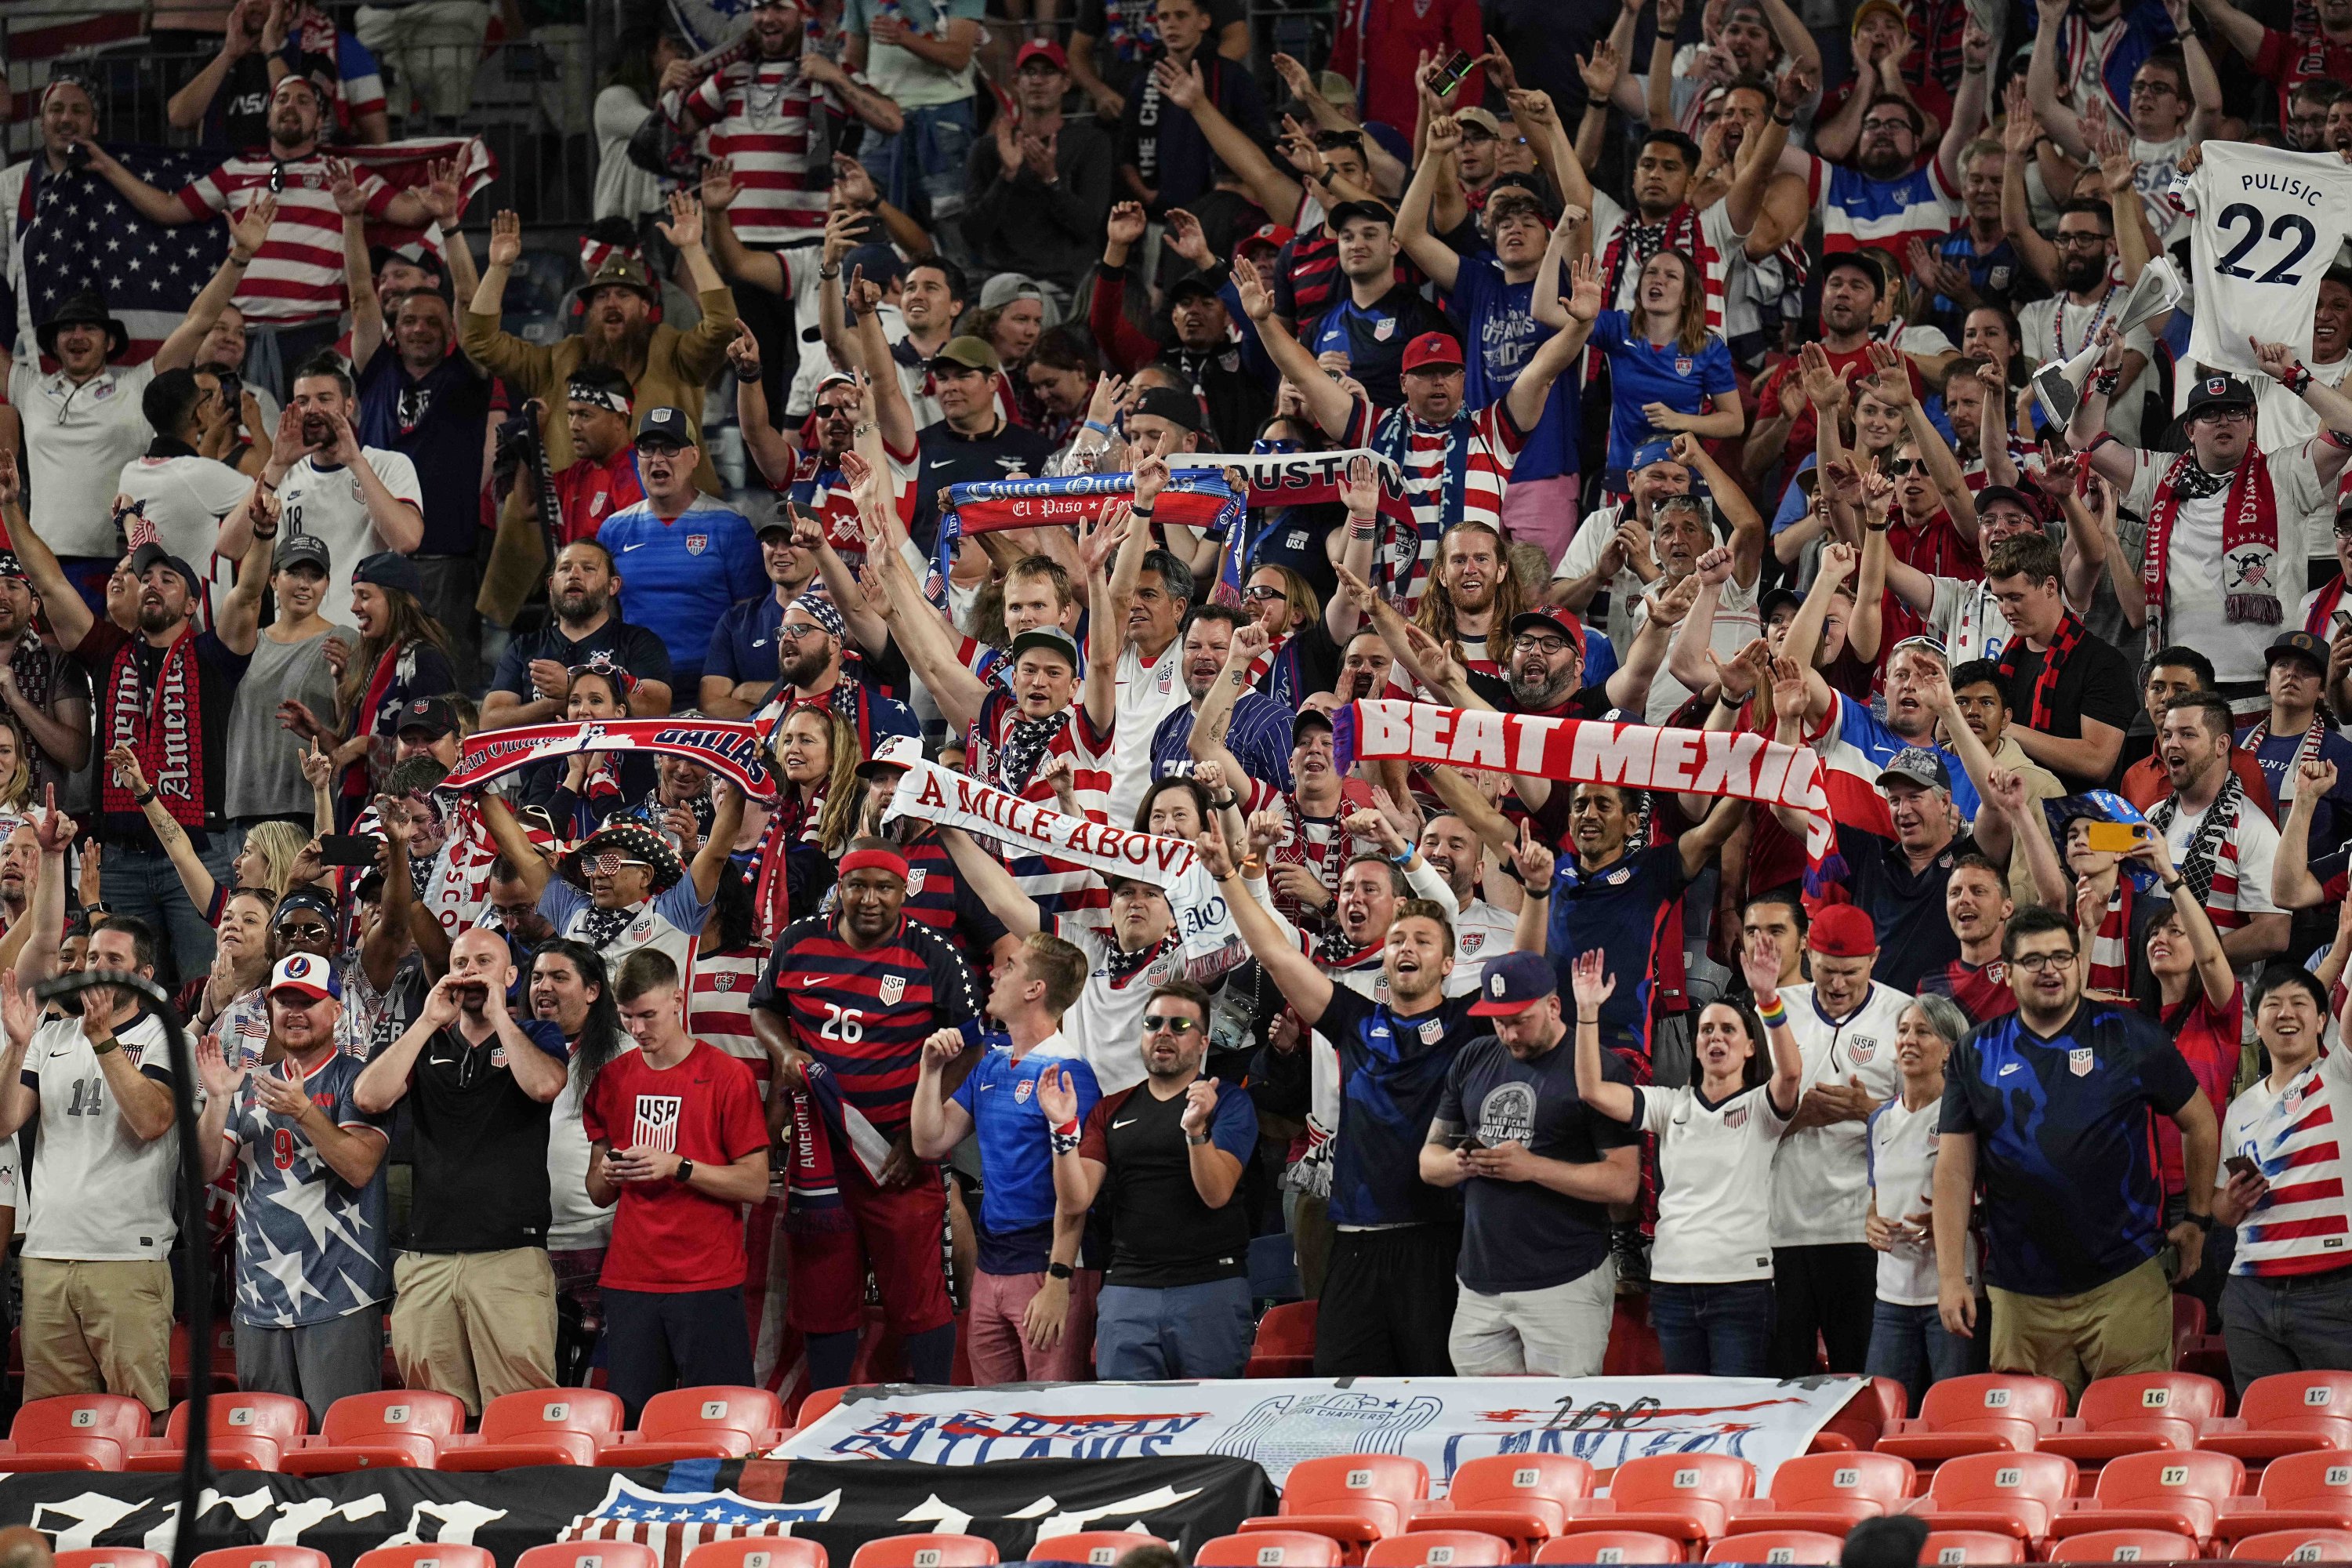 United States soccer fans cheer following the team's championship win against Mexico in extra time in the CONCACAF Nations League championship soccer match, Denver, Colorada, U.S., Sunday, June 6, 2021. (AP Photo)